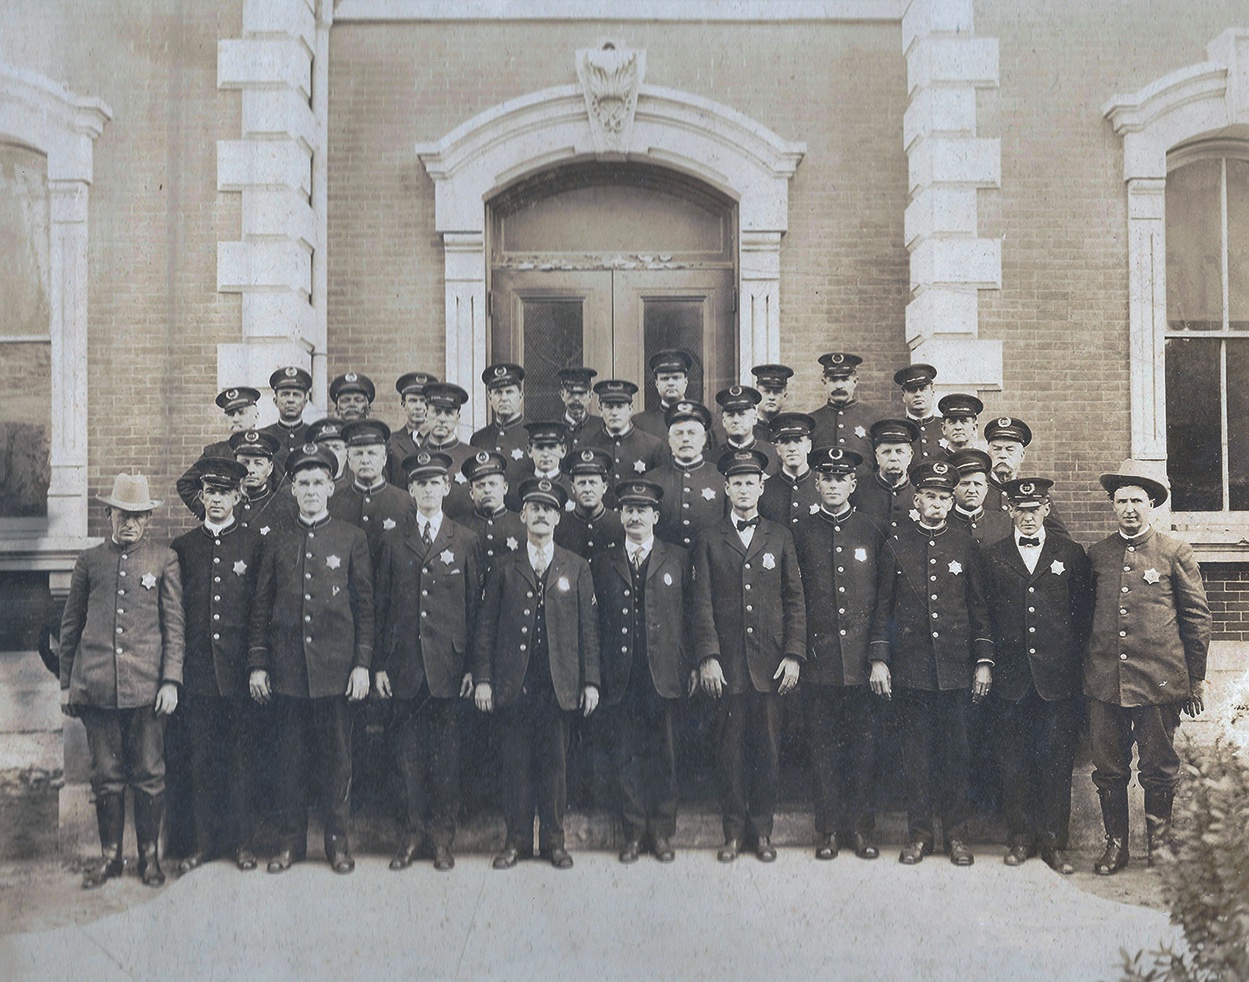 Members of the Houston Police Department in a 1920. (Gwen Bartlett Arthur)